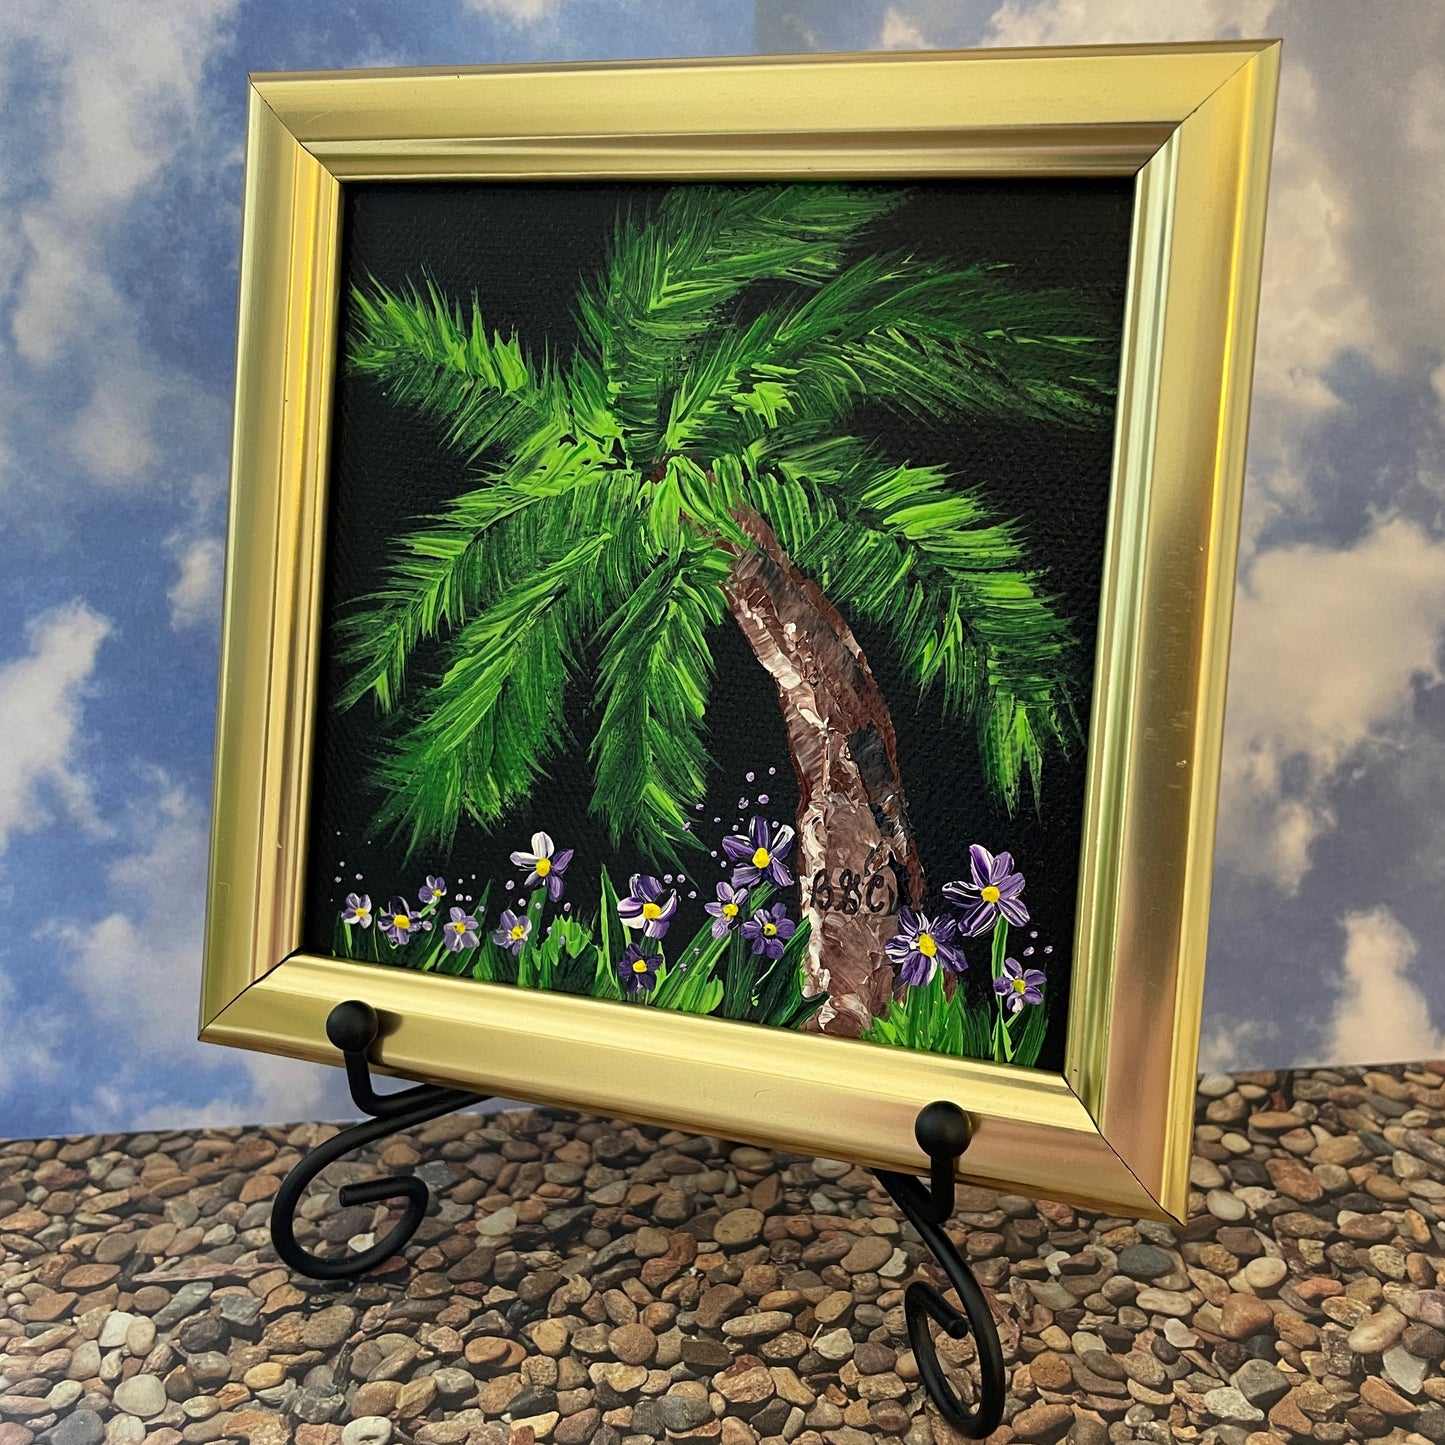 Original Painting of a Palm Tree with Purple Flowers in South Carolina